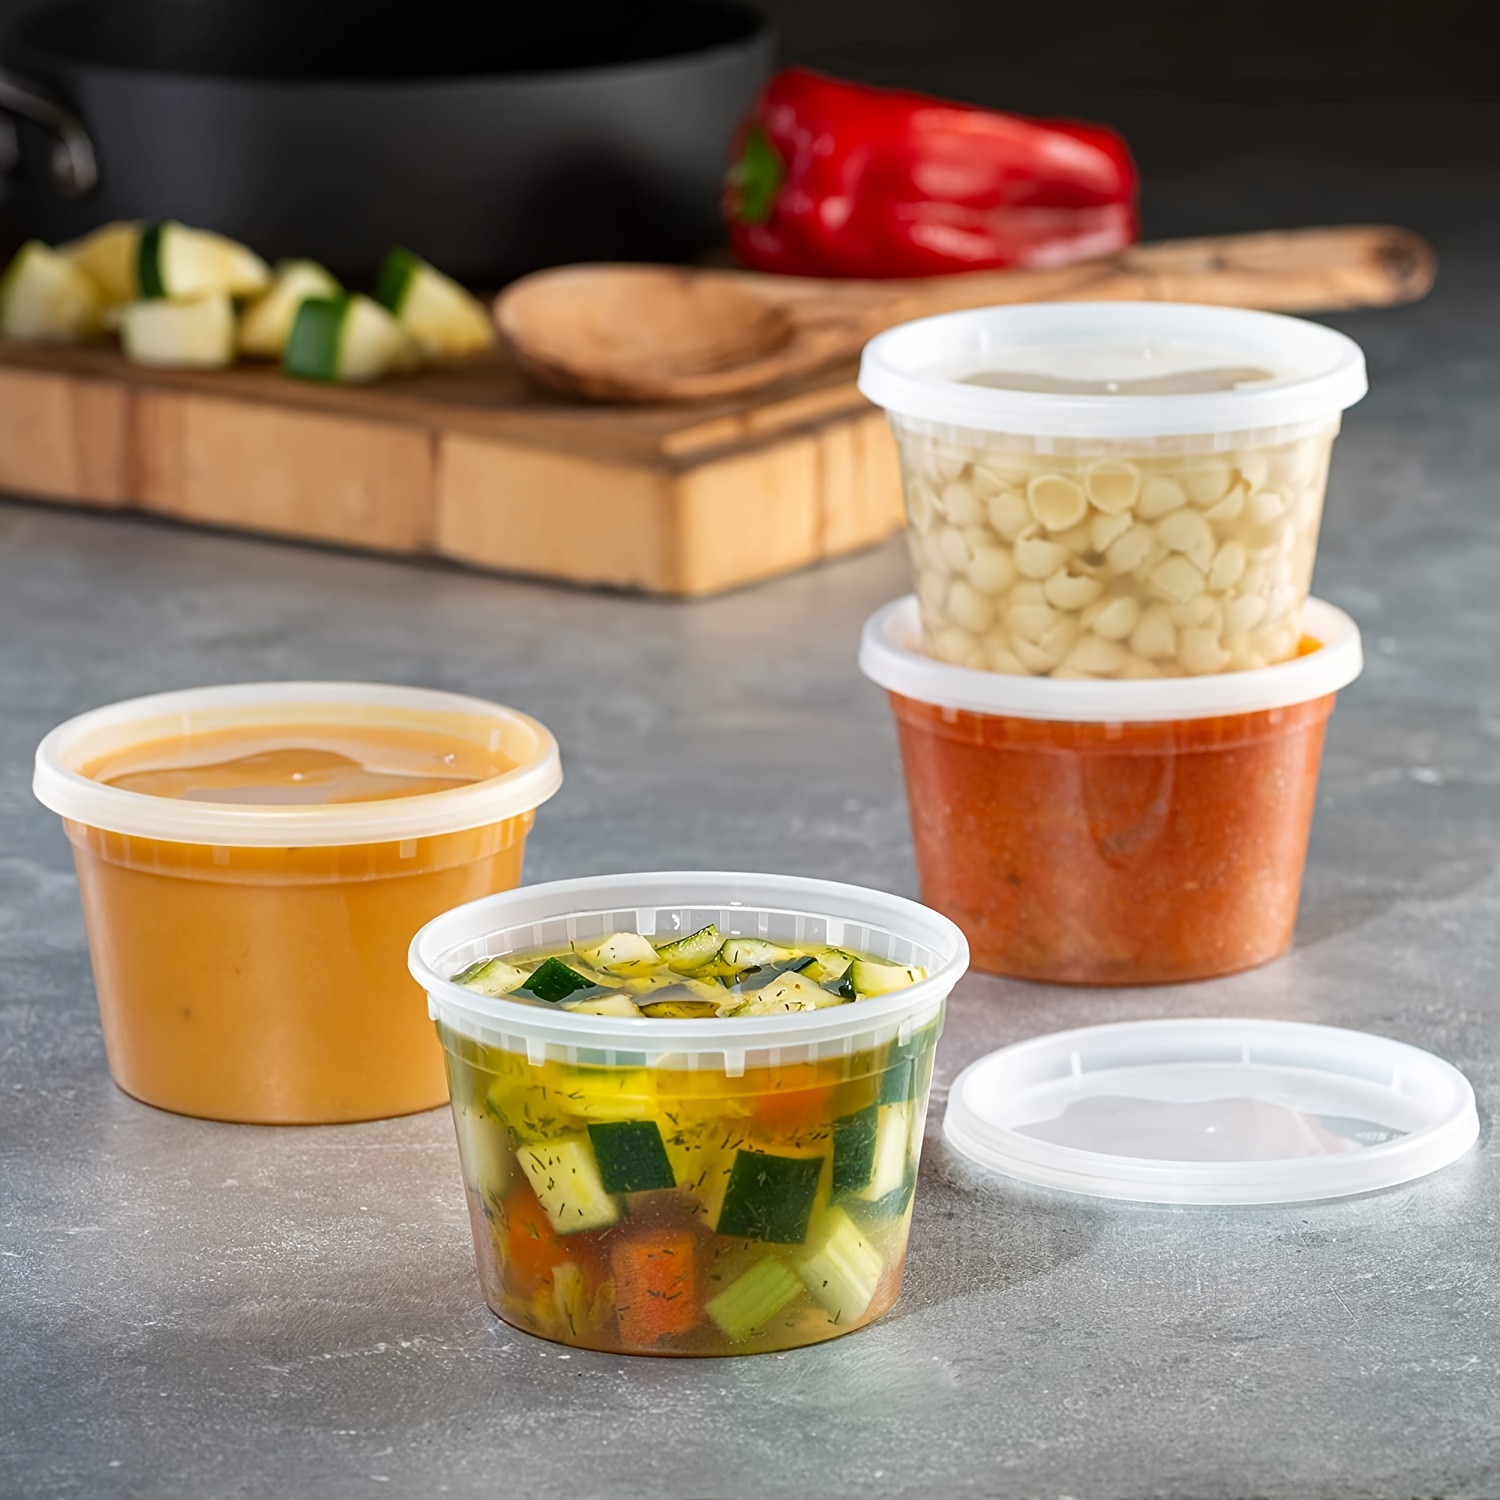 Stackable Leakproof Safe Plastic Deli Food Storage Containers With